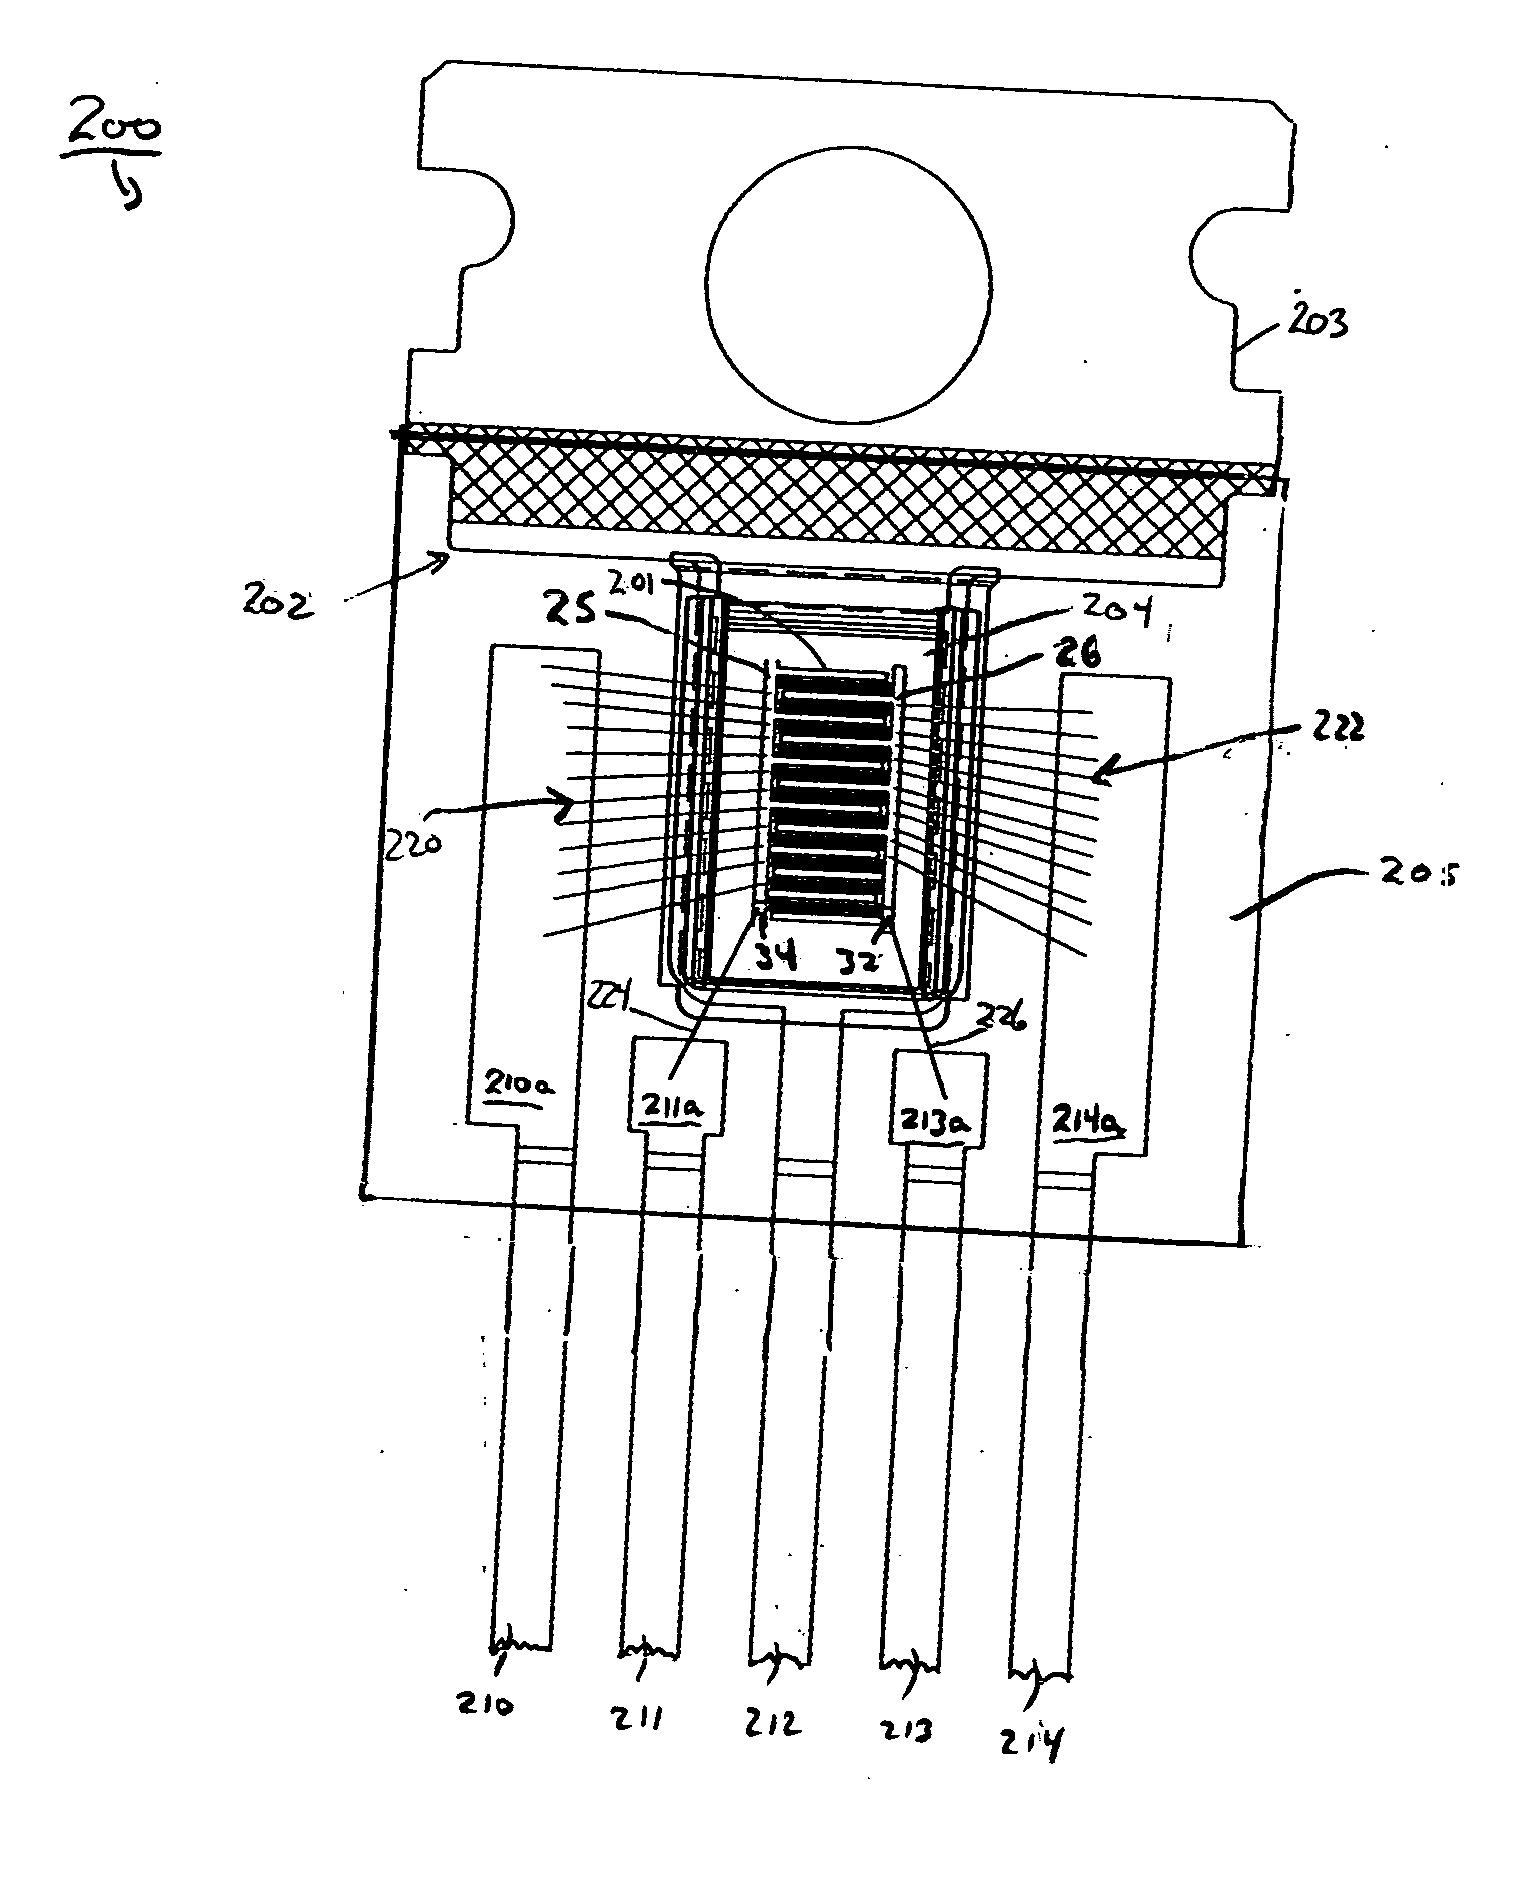 Wirebonded device packages for semiconductor devices having elongated electrodes